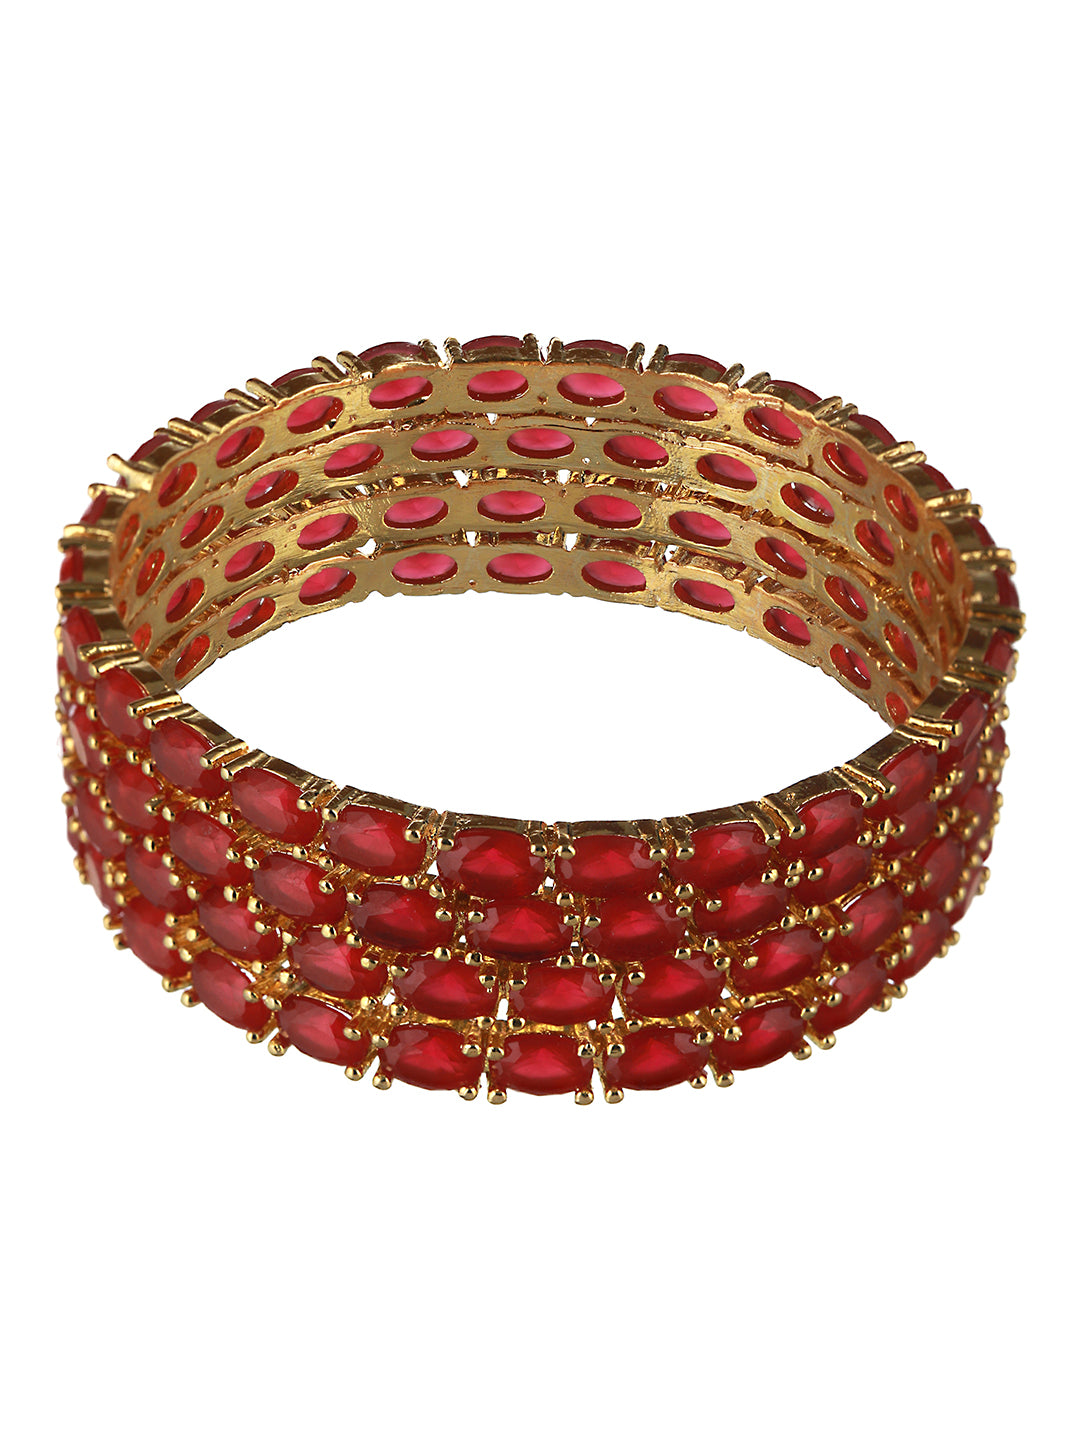 Set of 4 Gold Plated  Red Ruby Stone Studded  Bangles, zaveri pearls, sale price rs, sale price, sale gold plated, sale gold, sale, rubans, ring, regular price, priyassi jewellery, kushal's -